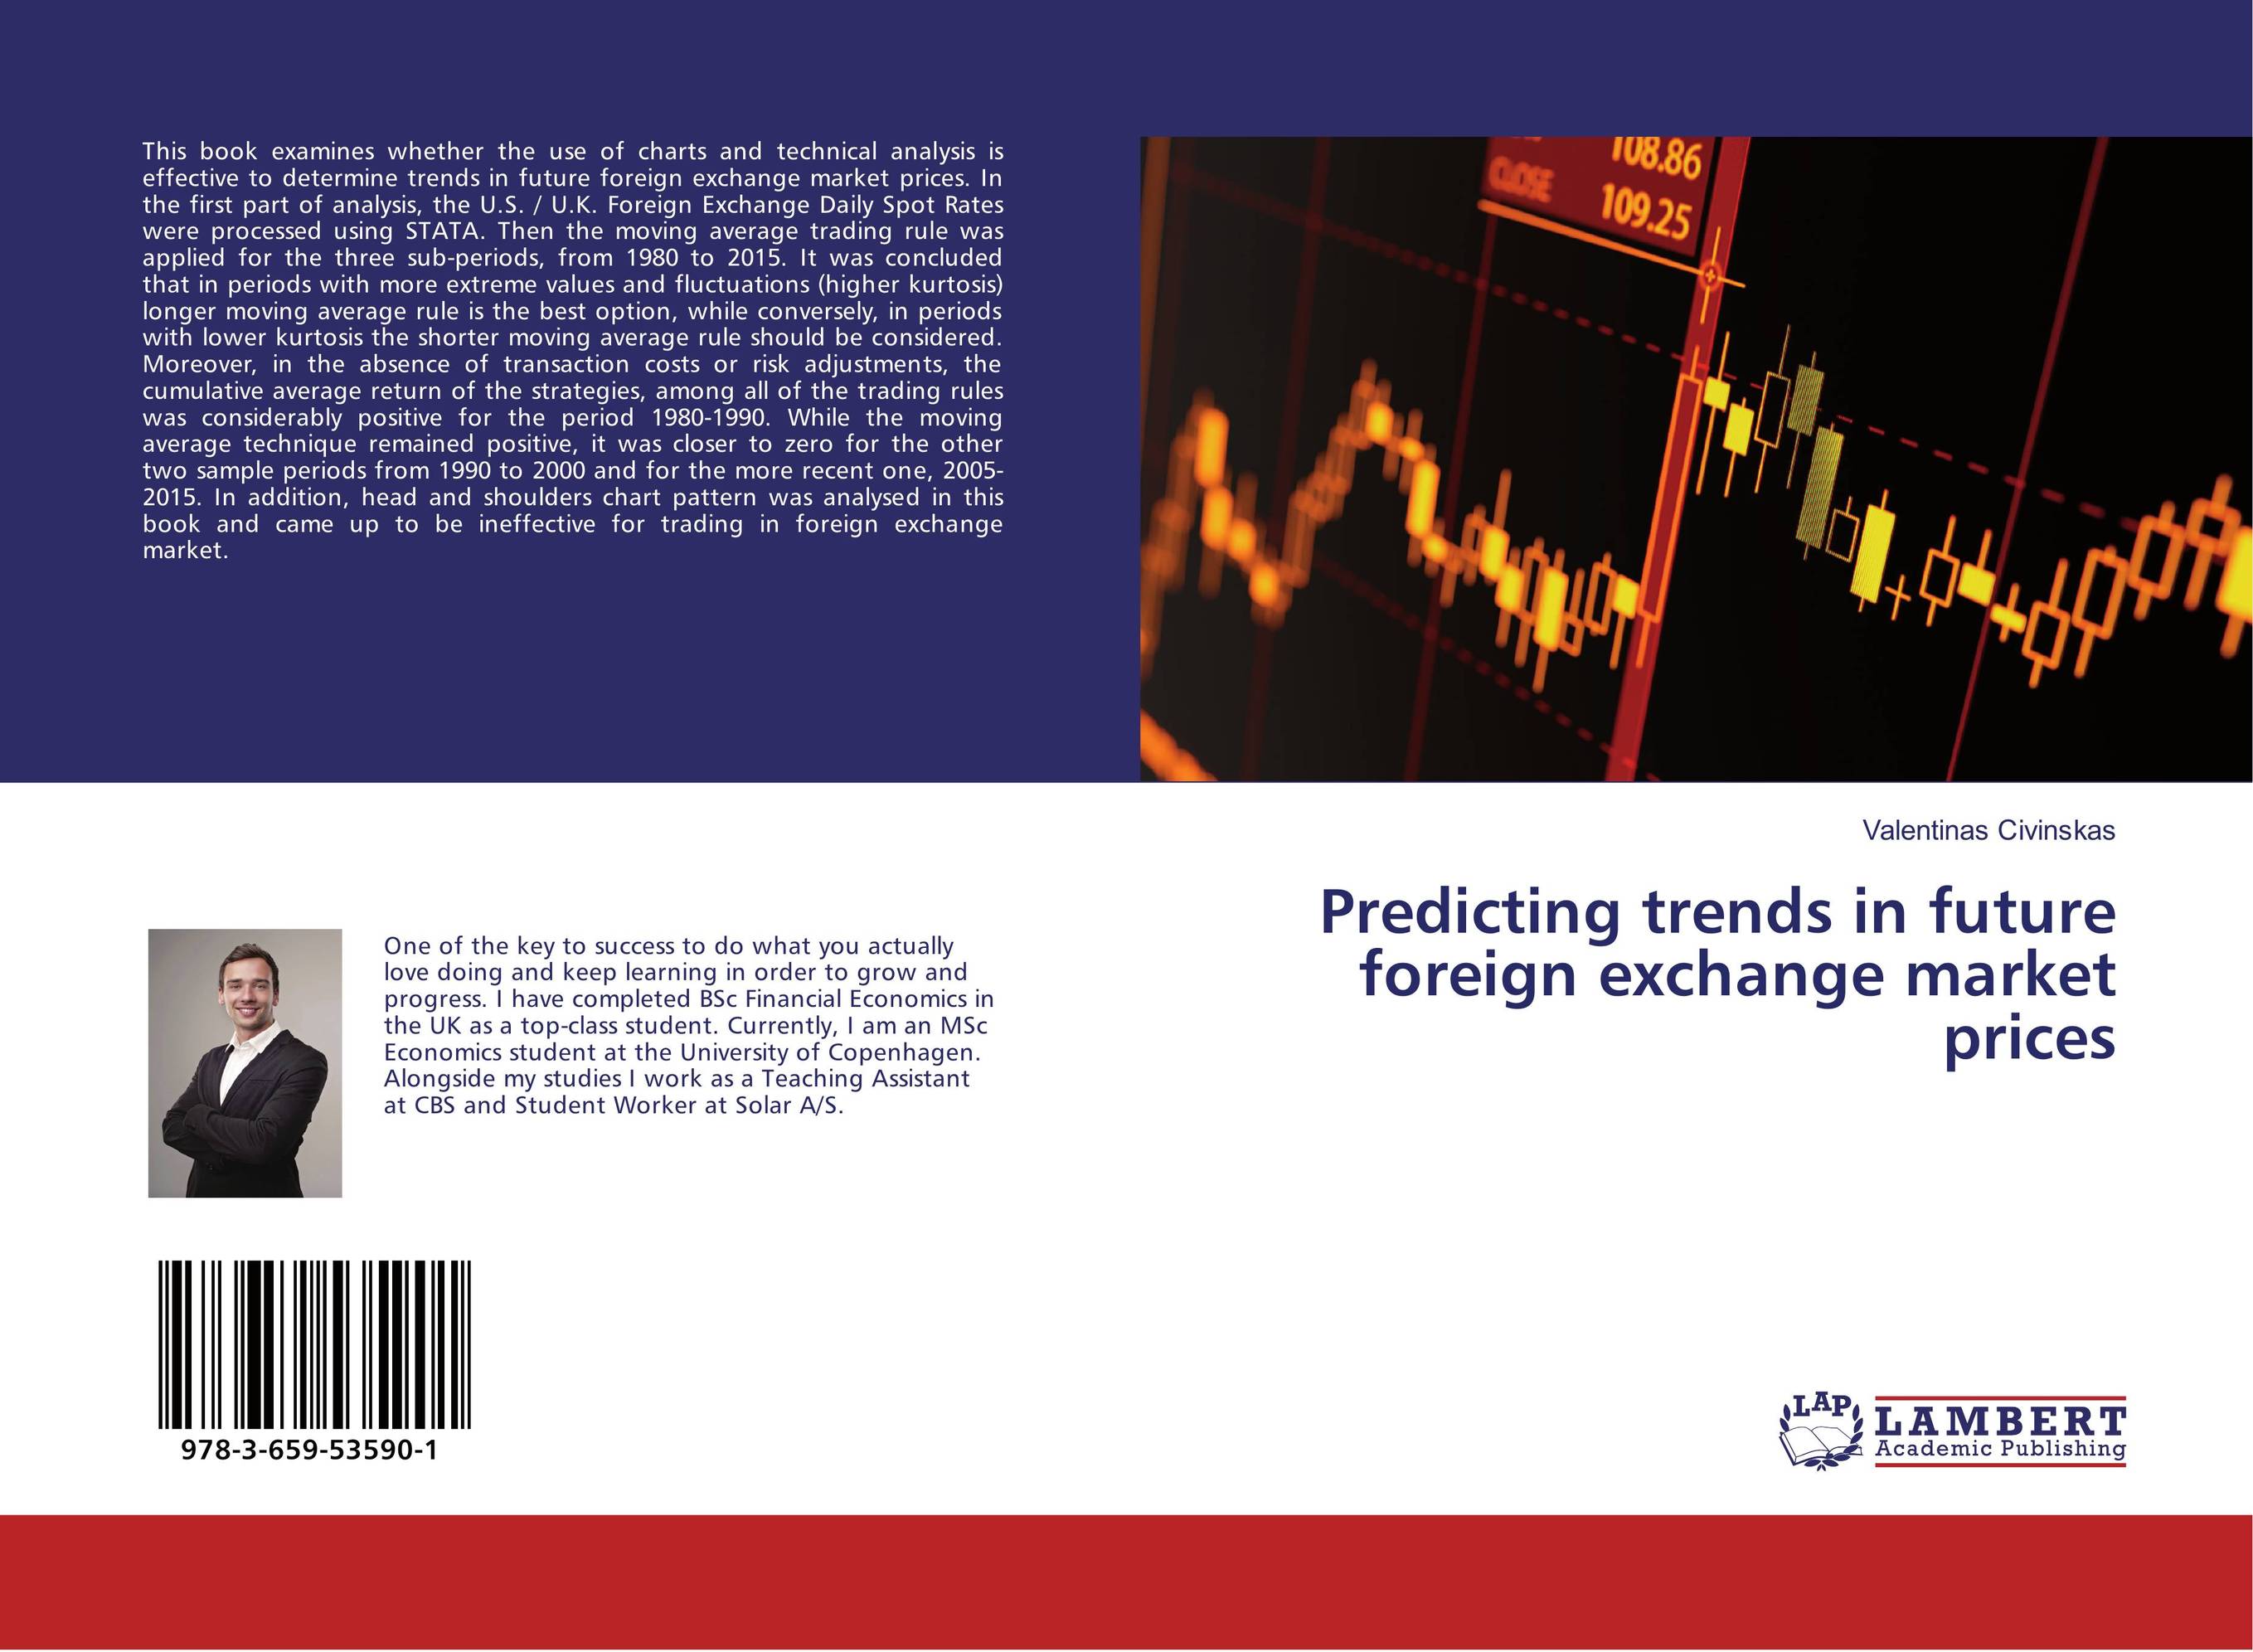 Predicting trends in future foreign exchange market prices